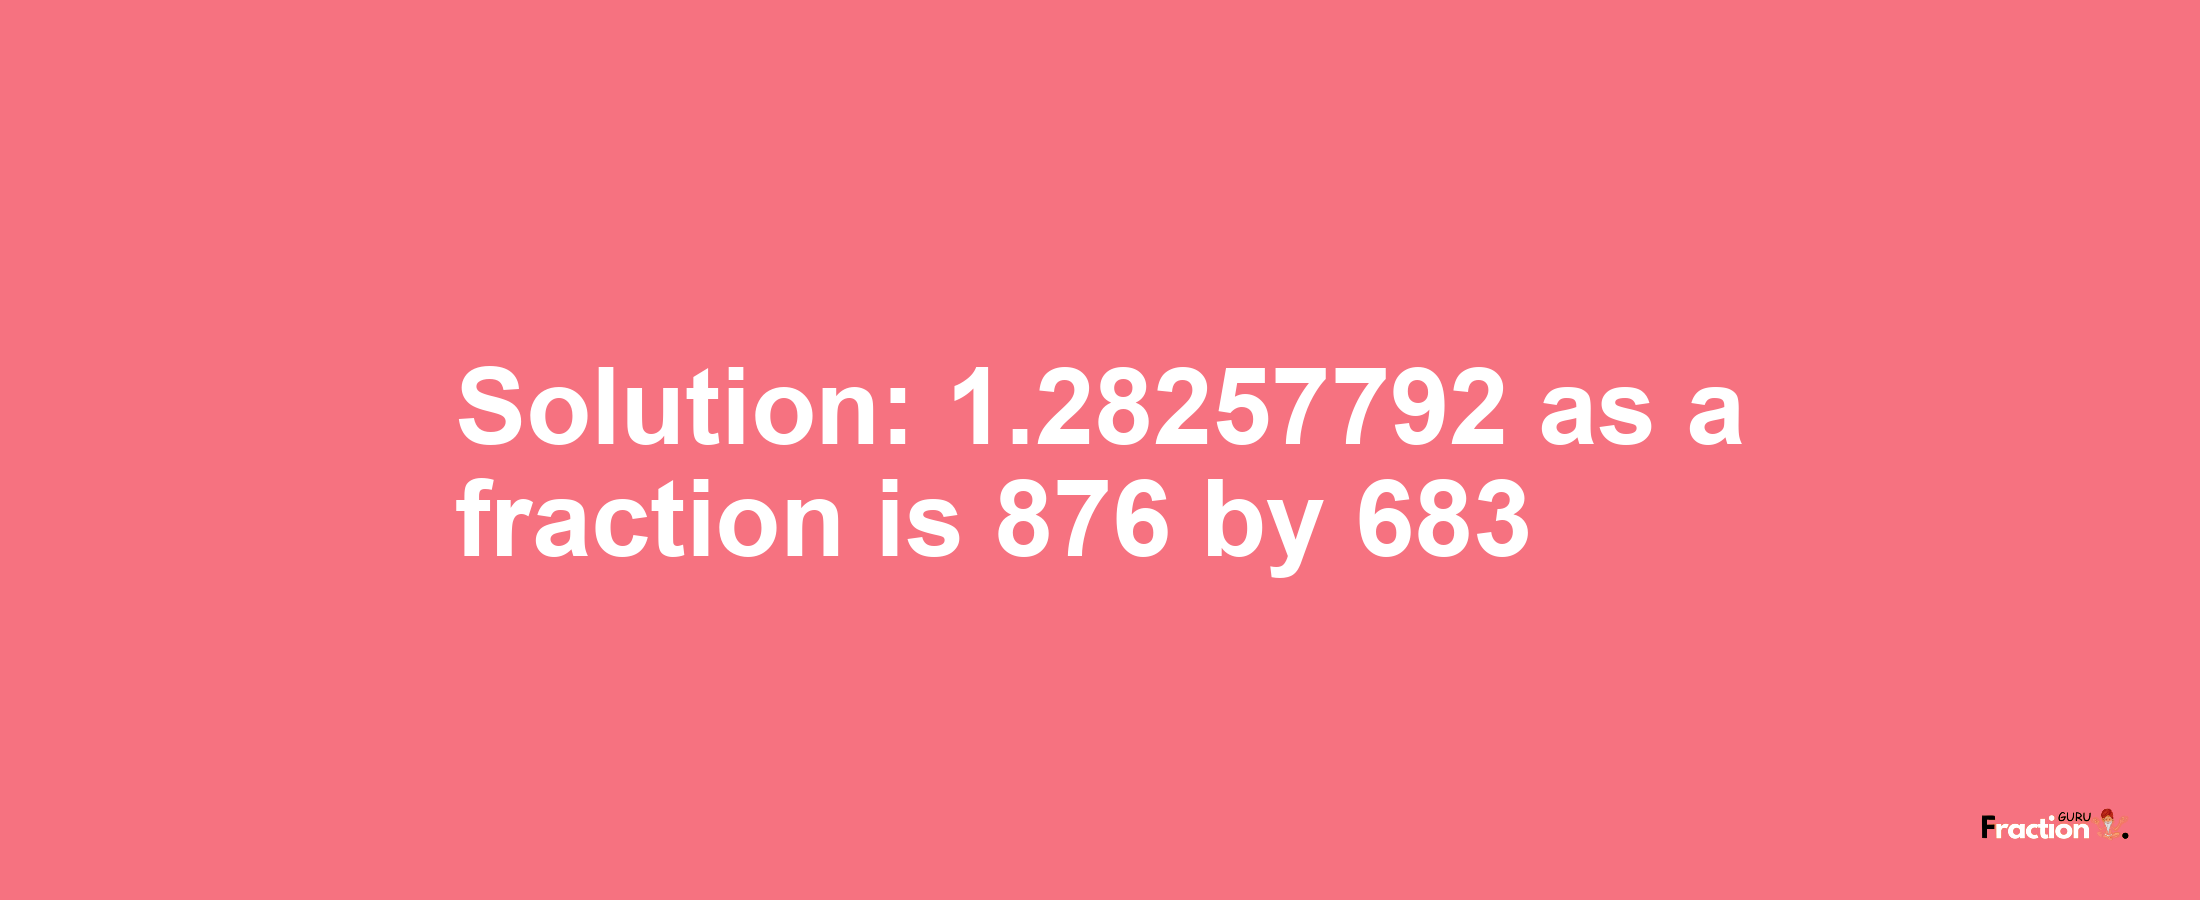 Solution:1.28257792 as a fraction is 876/683